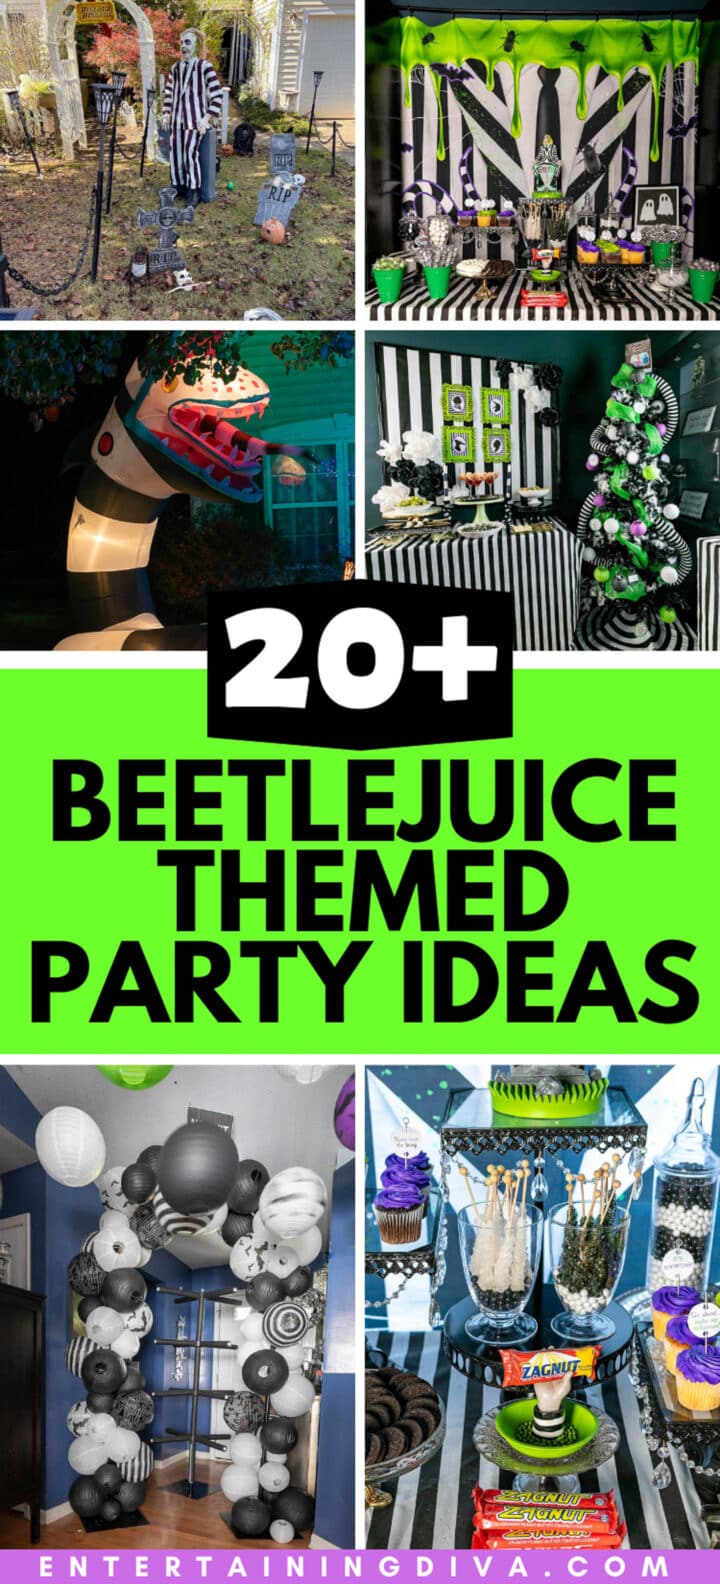 20 beetlejuice themed party ideas.